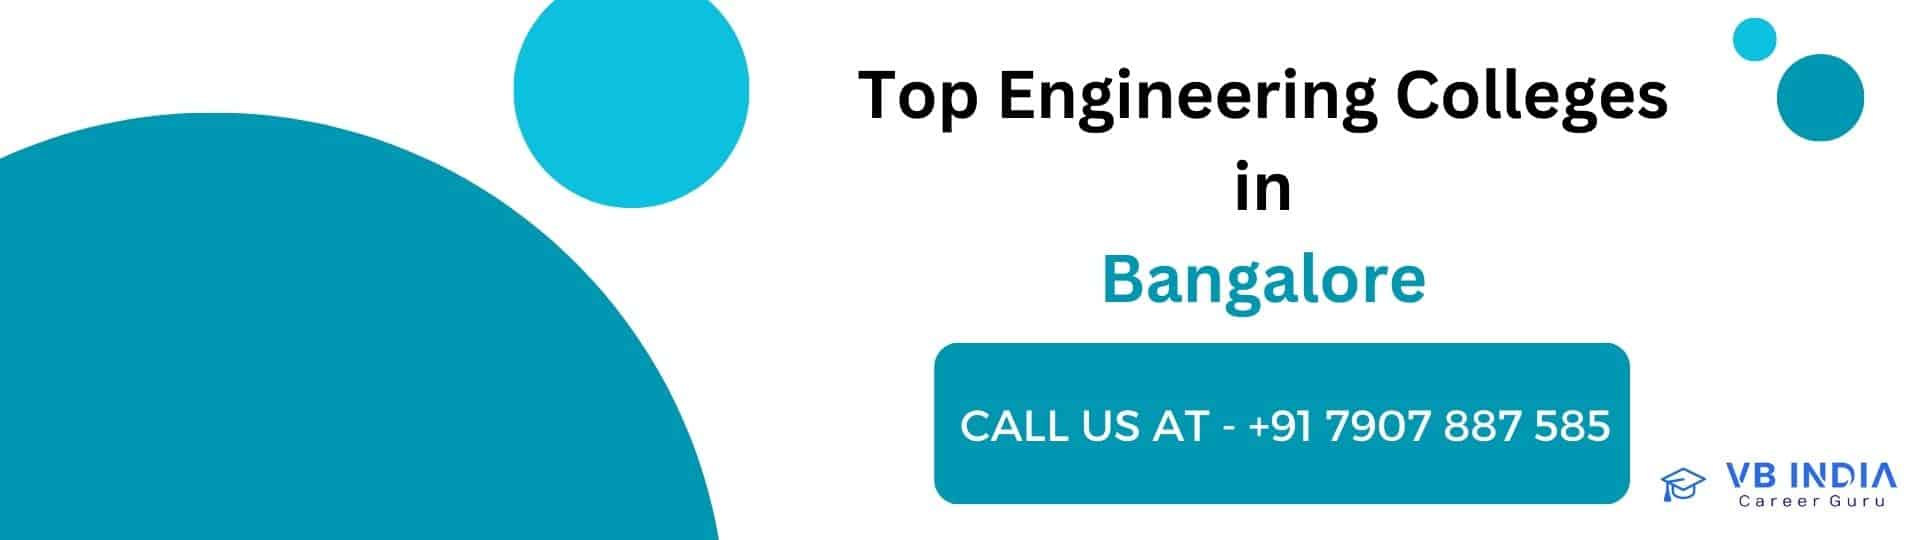 top engineering colleges in bangalore